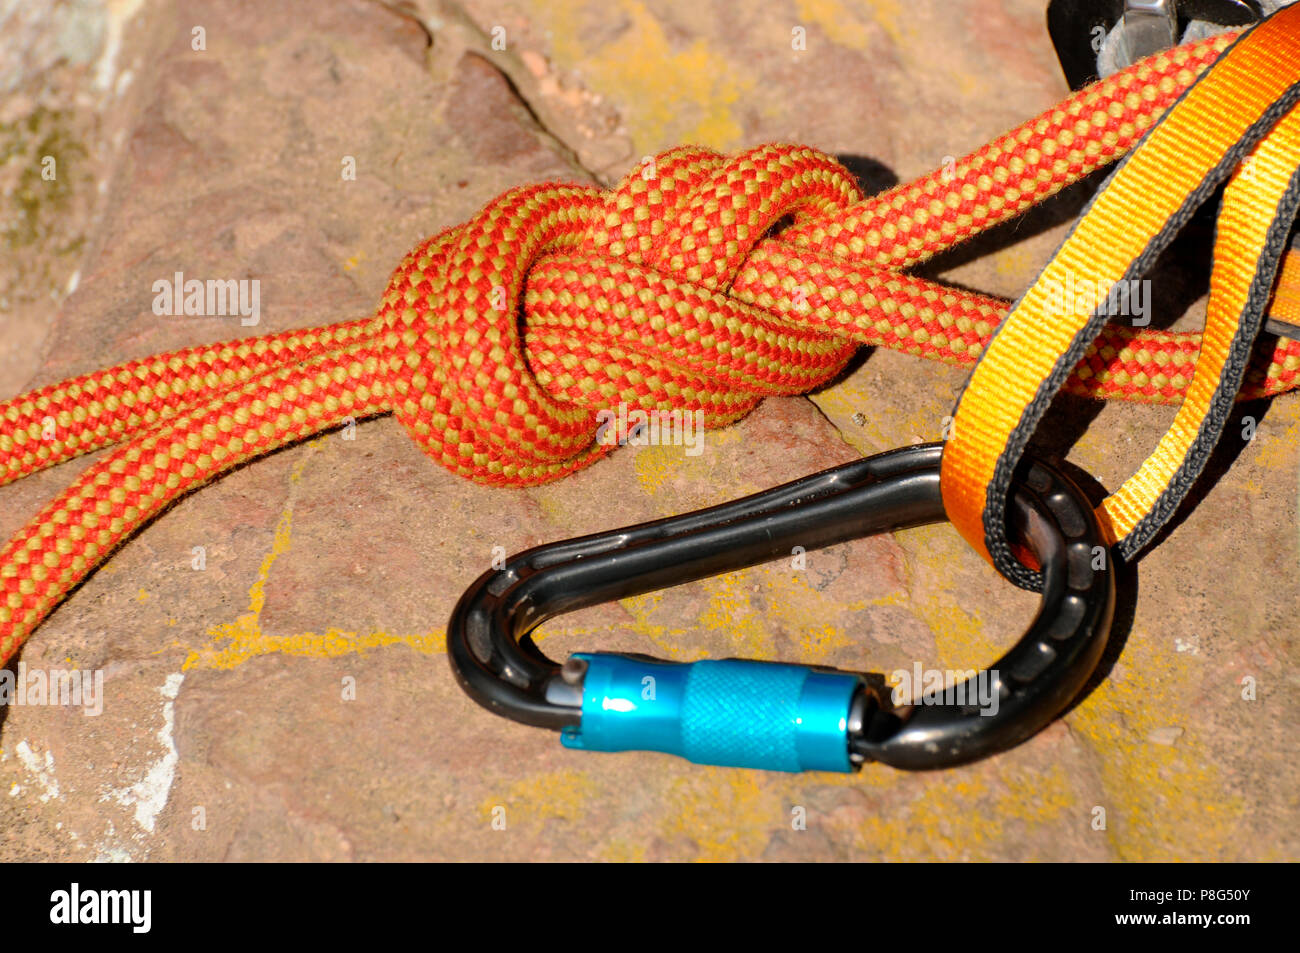 Climbing Equipment, rock climbing, mountaineering, locking carabiner, webbing, figure-eight knot, knot, secure, securing Stock Photo